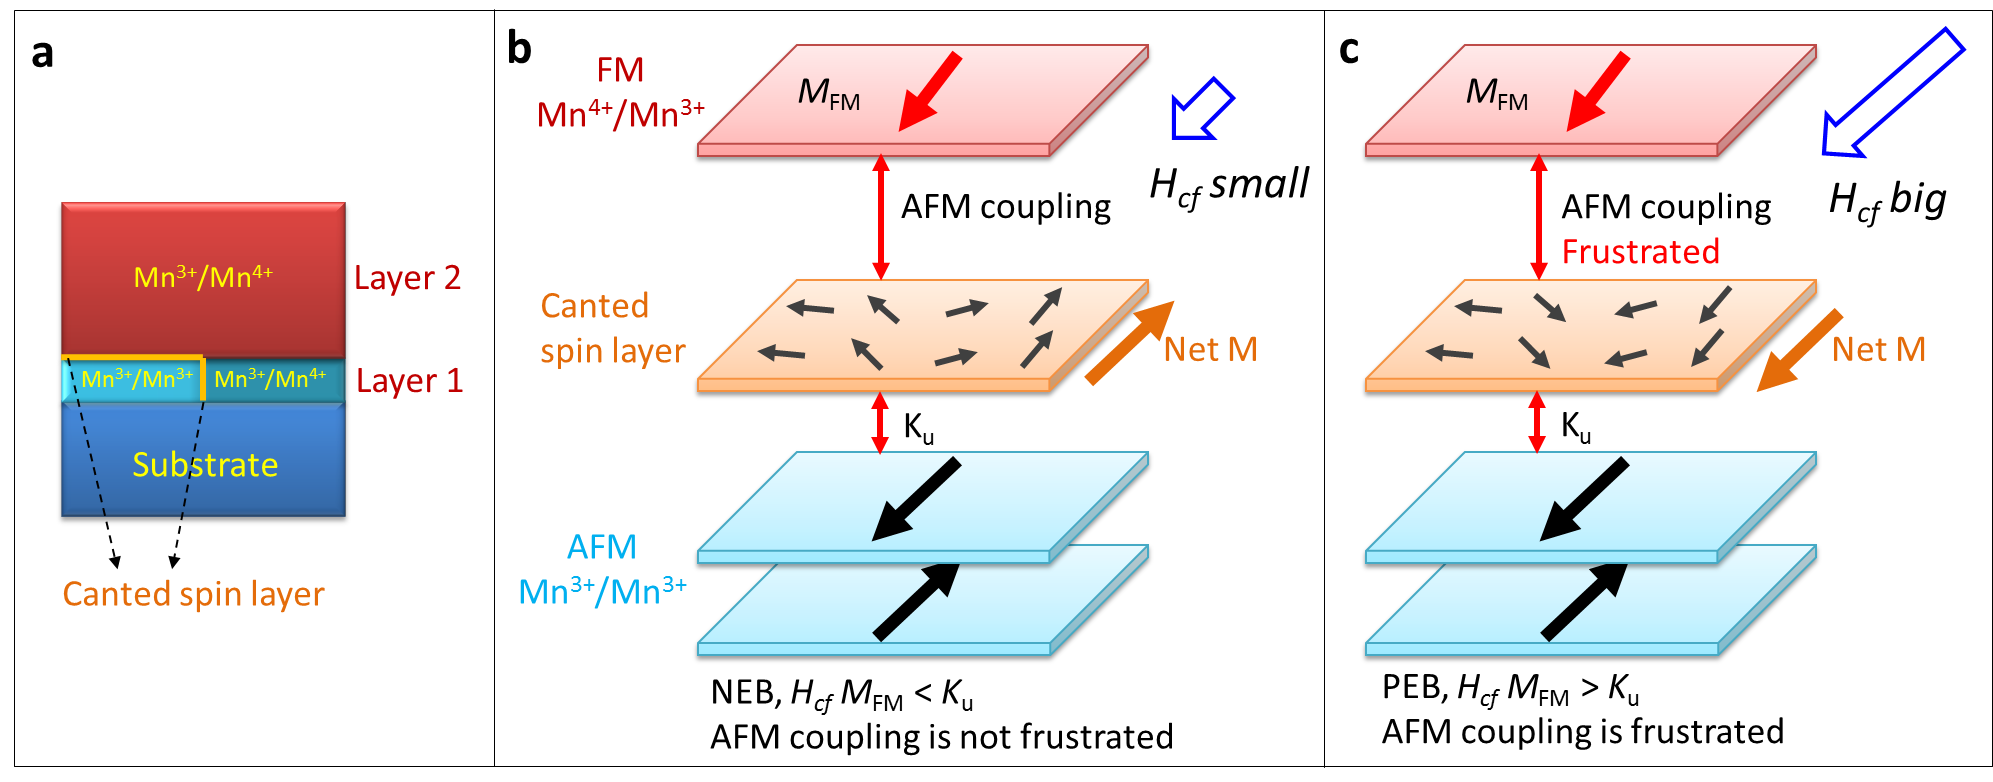 Figure 2. Spin configuration of nominally ferromagnetic manganite oxide heterostructures with an interfacial layer formed between a manganite layer and a SrTiO3 substrate.  Reproduced with permission from A. Chen et al., 10.1002/adma.201700672.